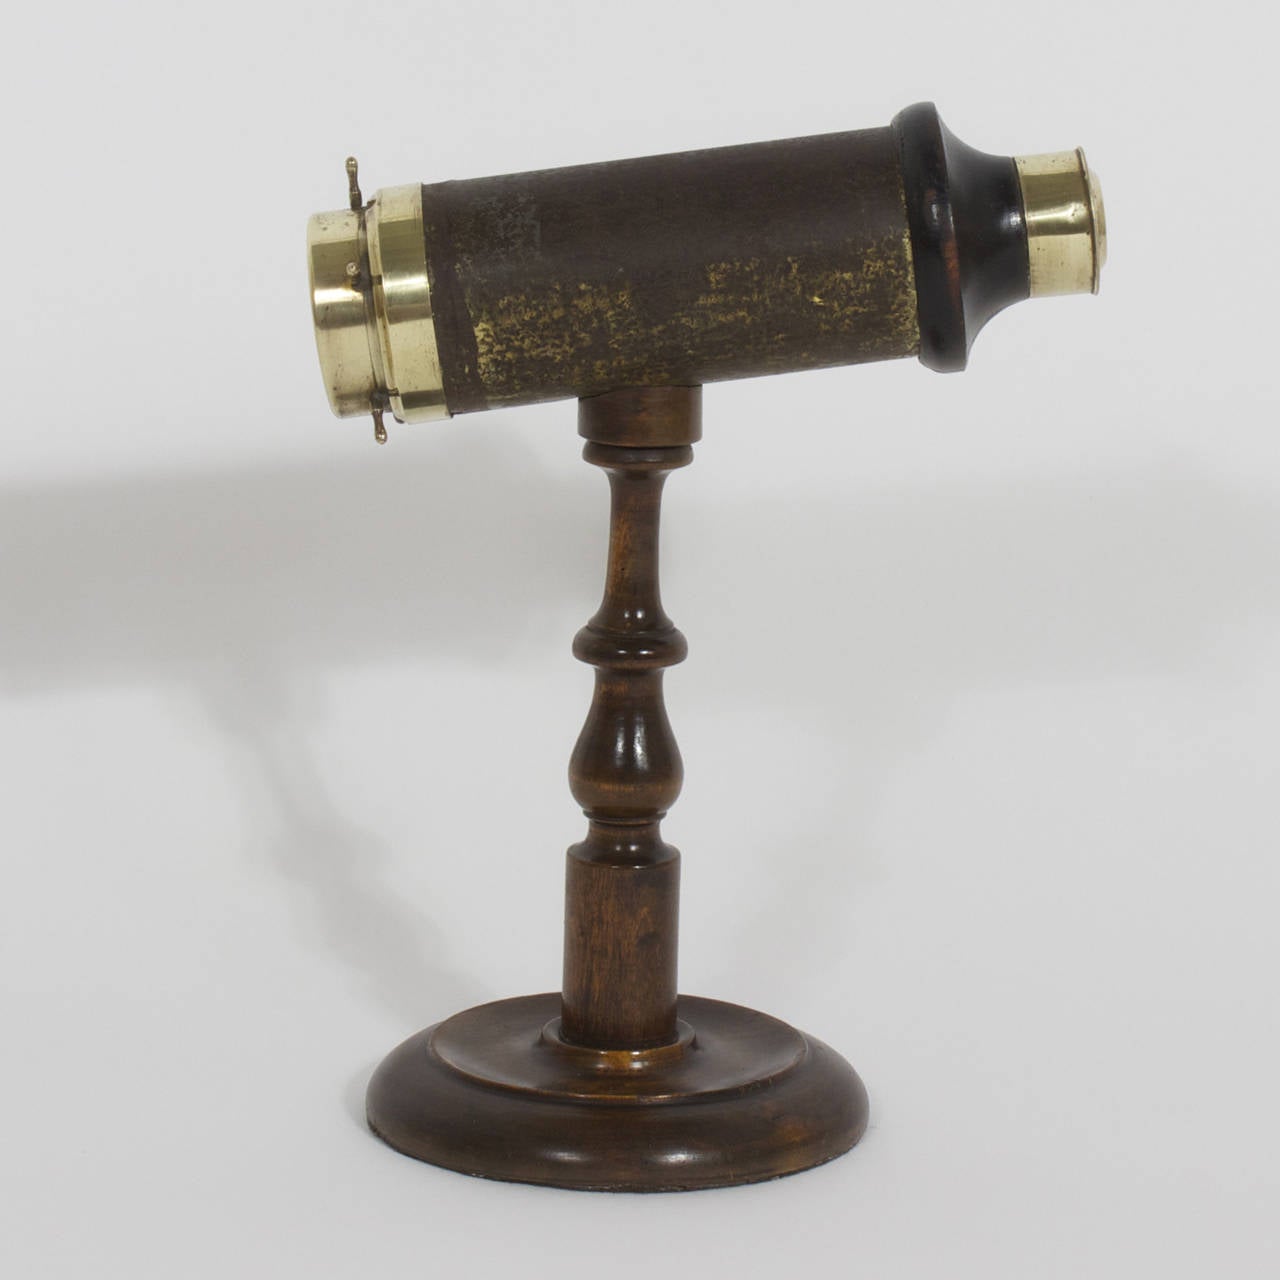 Antique kaleidescope with brass eyepiece and a wood and leather cylinder brass turning mechanizum in the shape of a ships wheel. The classic base is of turned and polished hardwood. Originally found in upperclass parlors, Kaleidoscopes where the